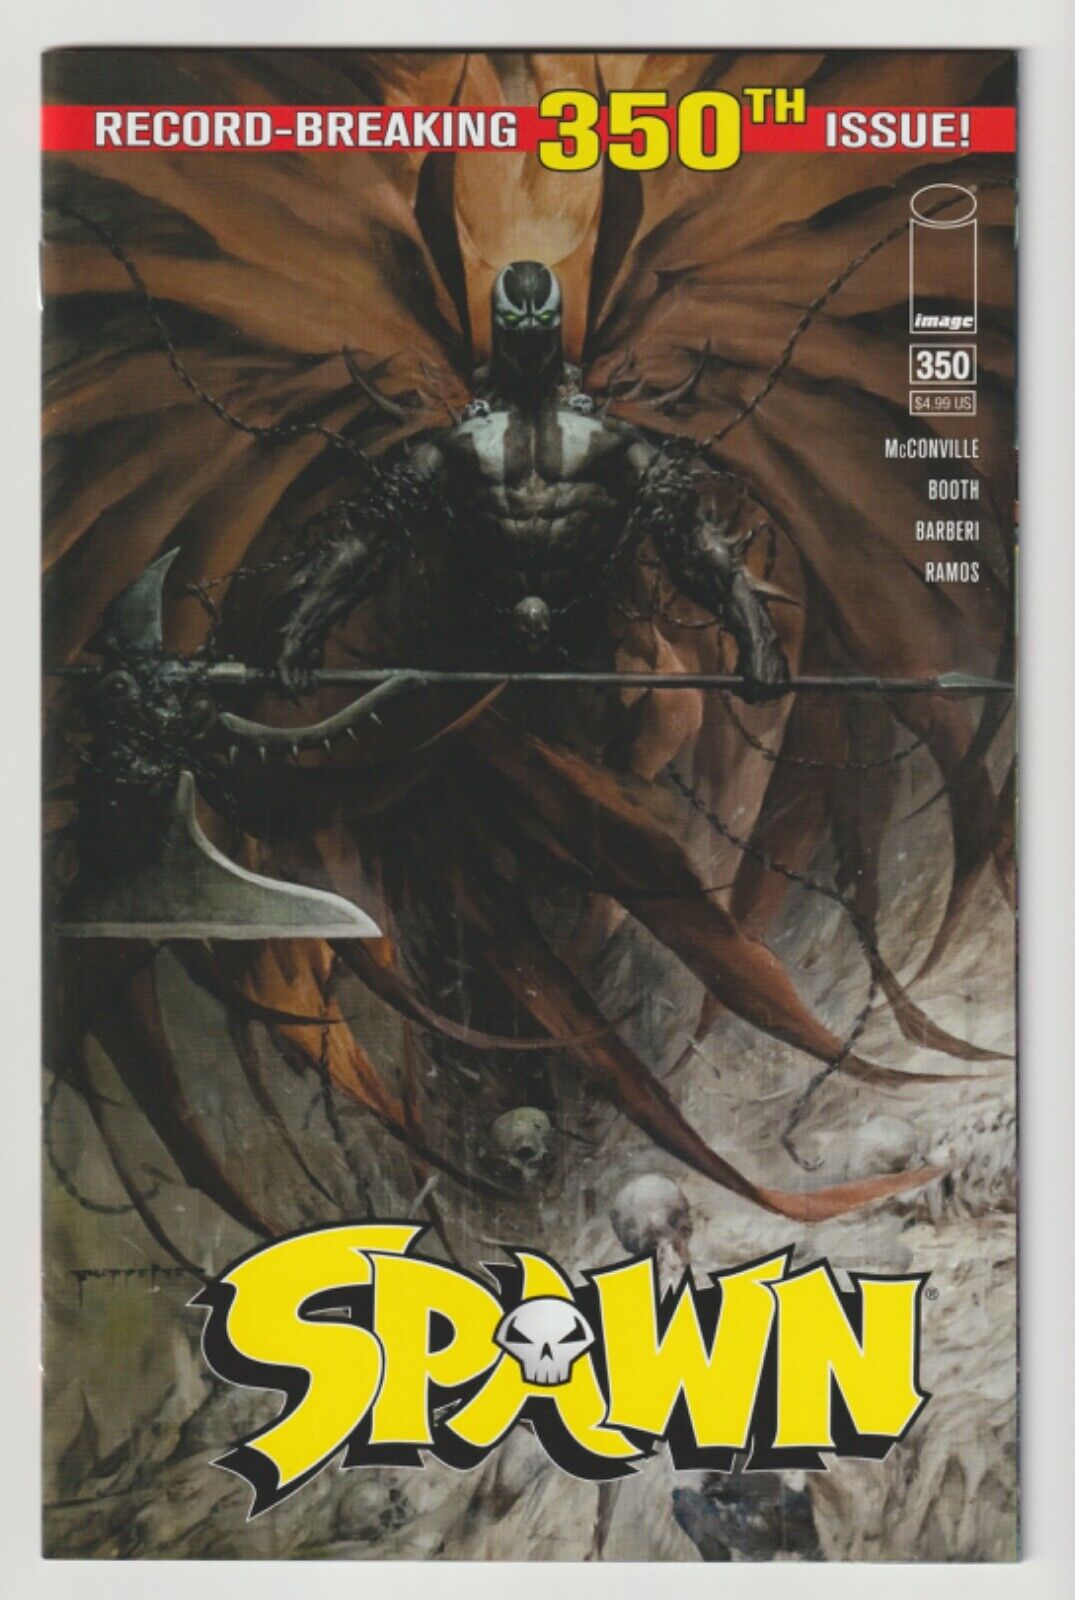 Spawn (2024) #350A VF/NM - Rory McConville/Todd McFarlane - Image